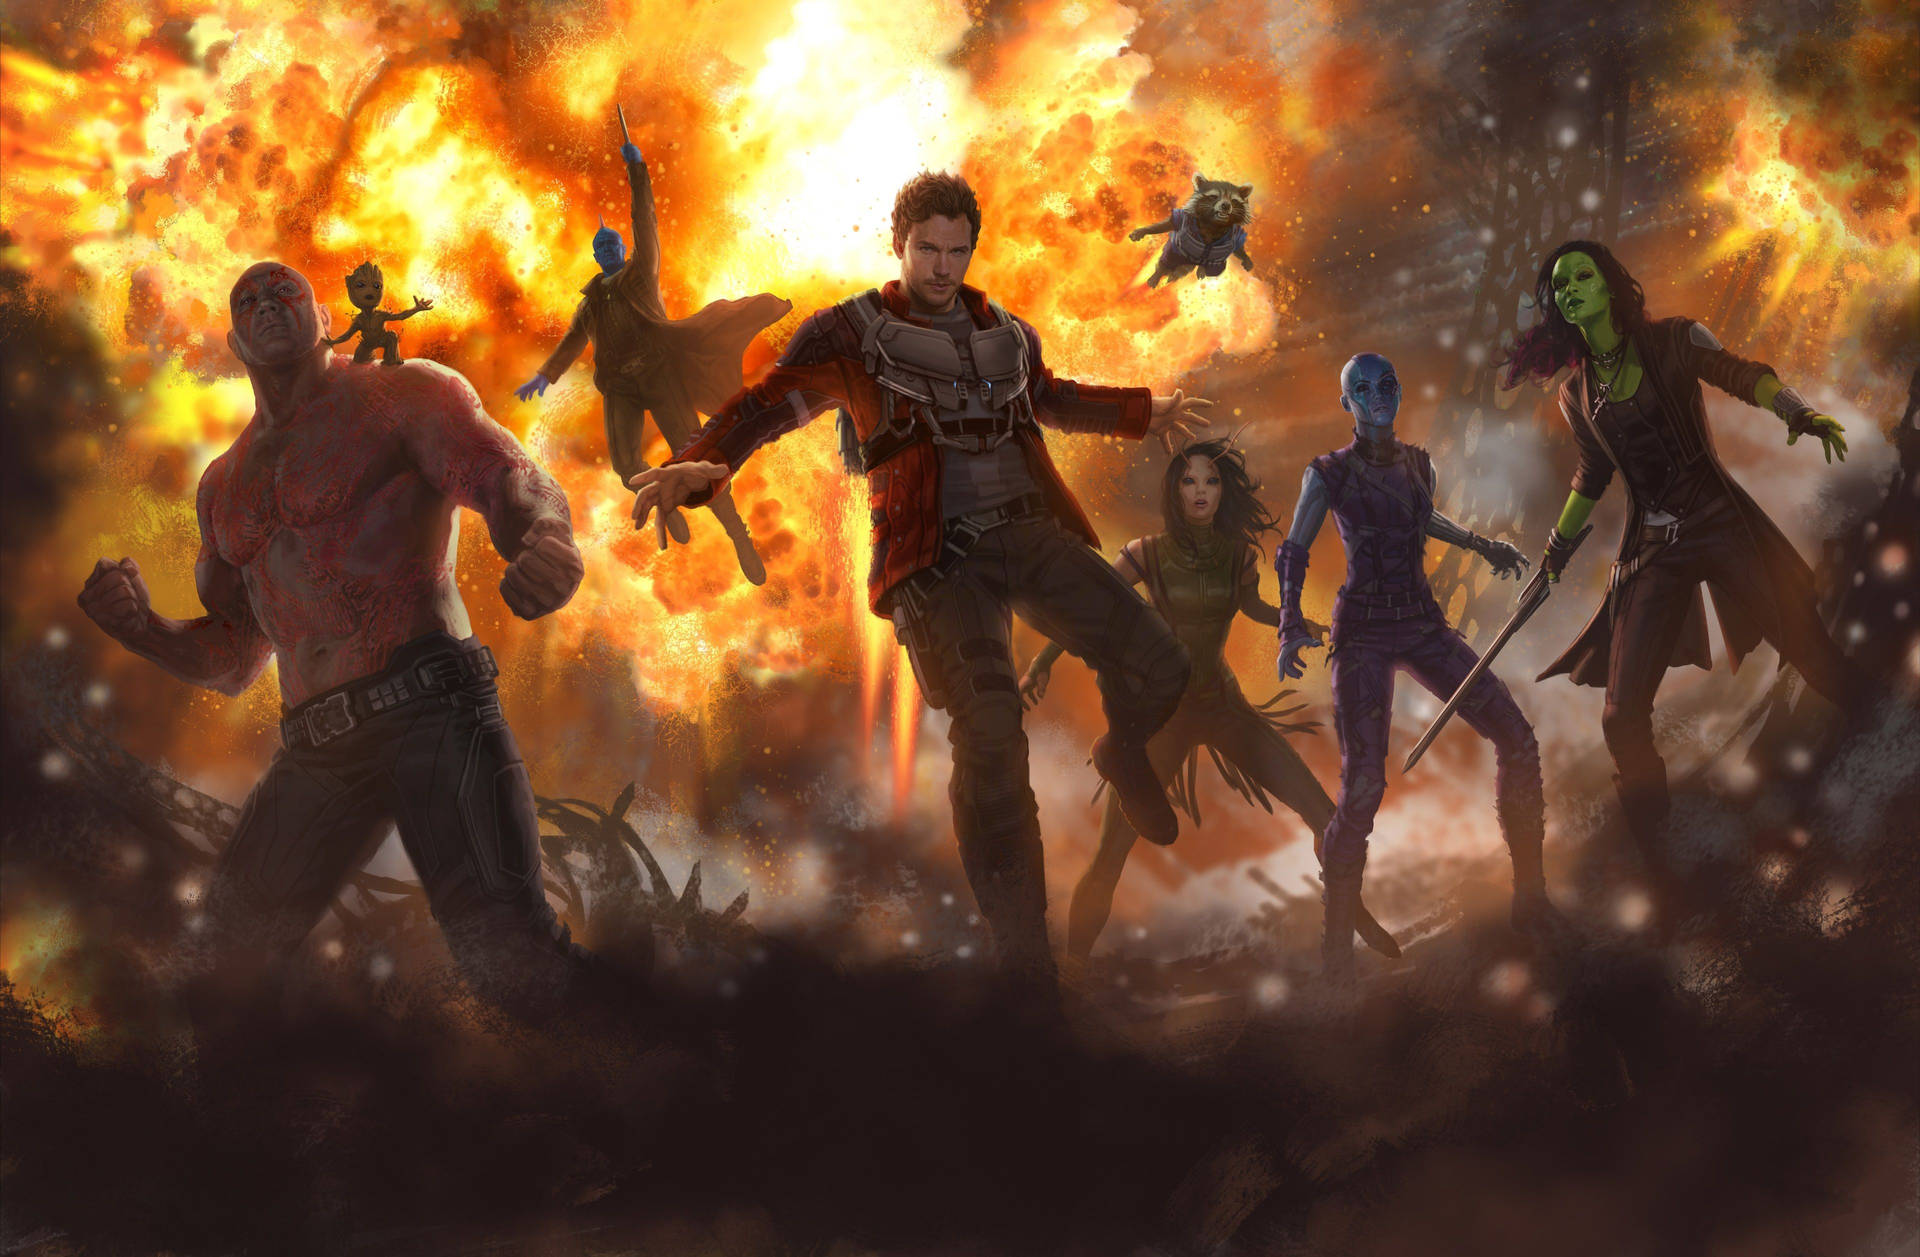 Join the Guardians of the Galaxy on their intergalactic adventures! Wallpaper